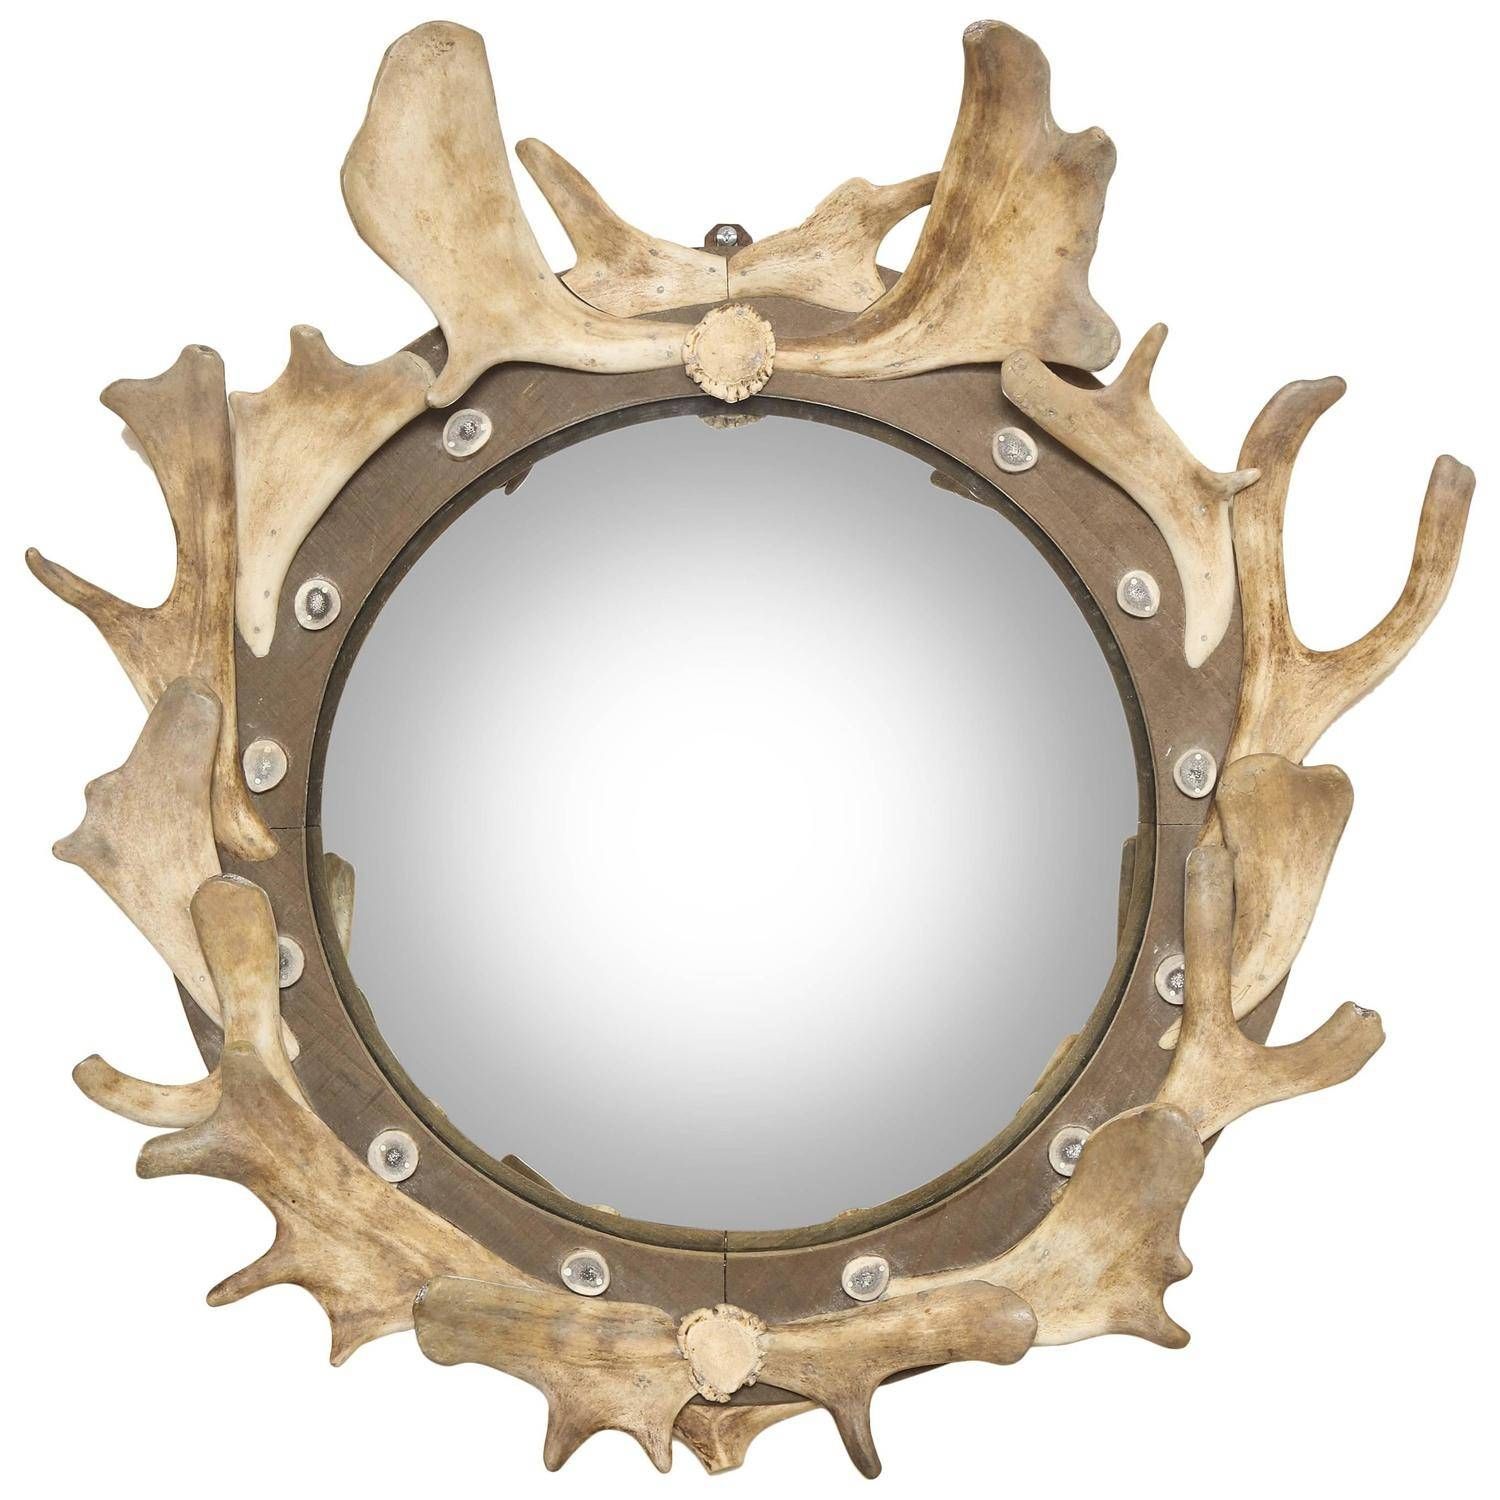 Antler And Wood Mounted Round Frame With Inset Convex Mirrored Regarding Antique Round Mirrors (View 10 of 25)